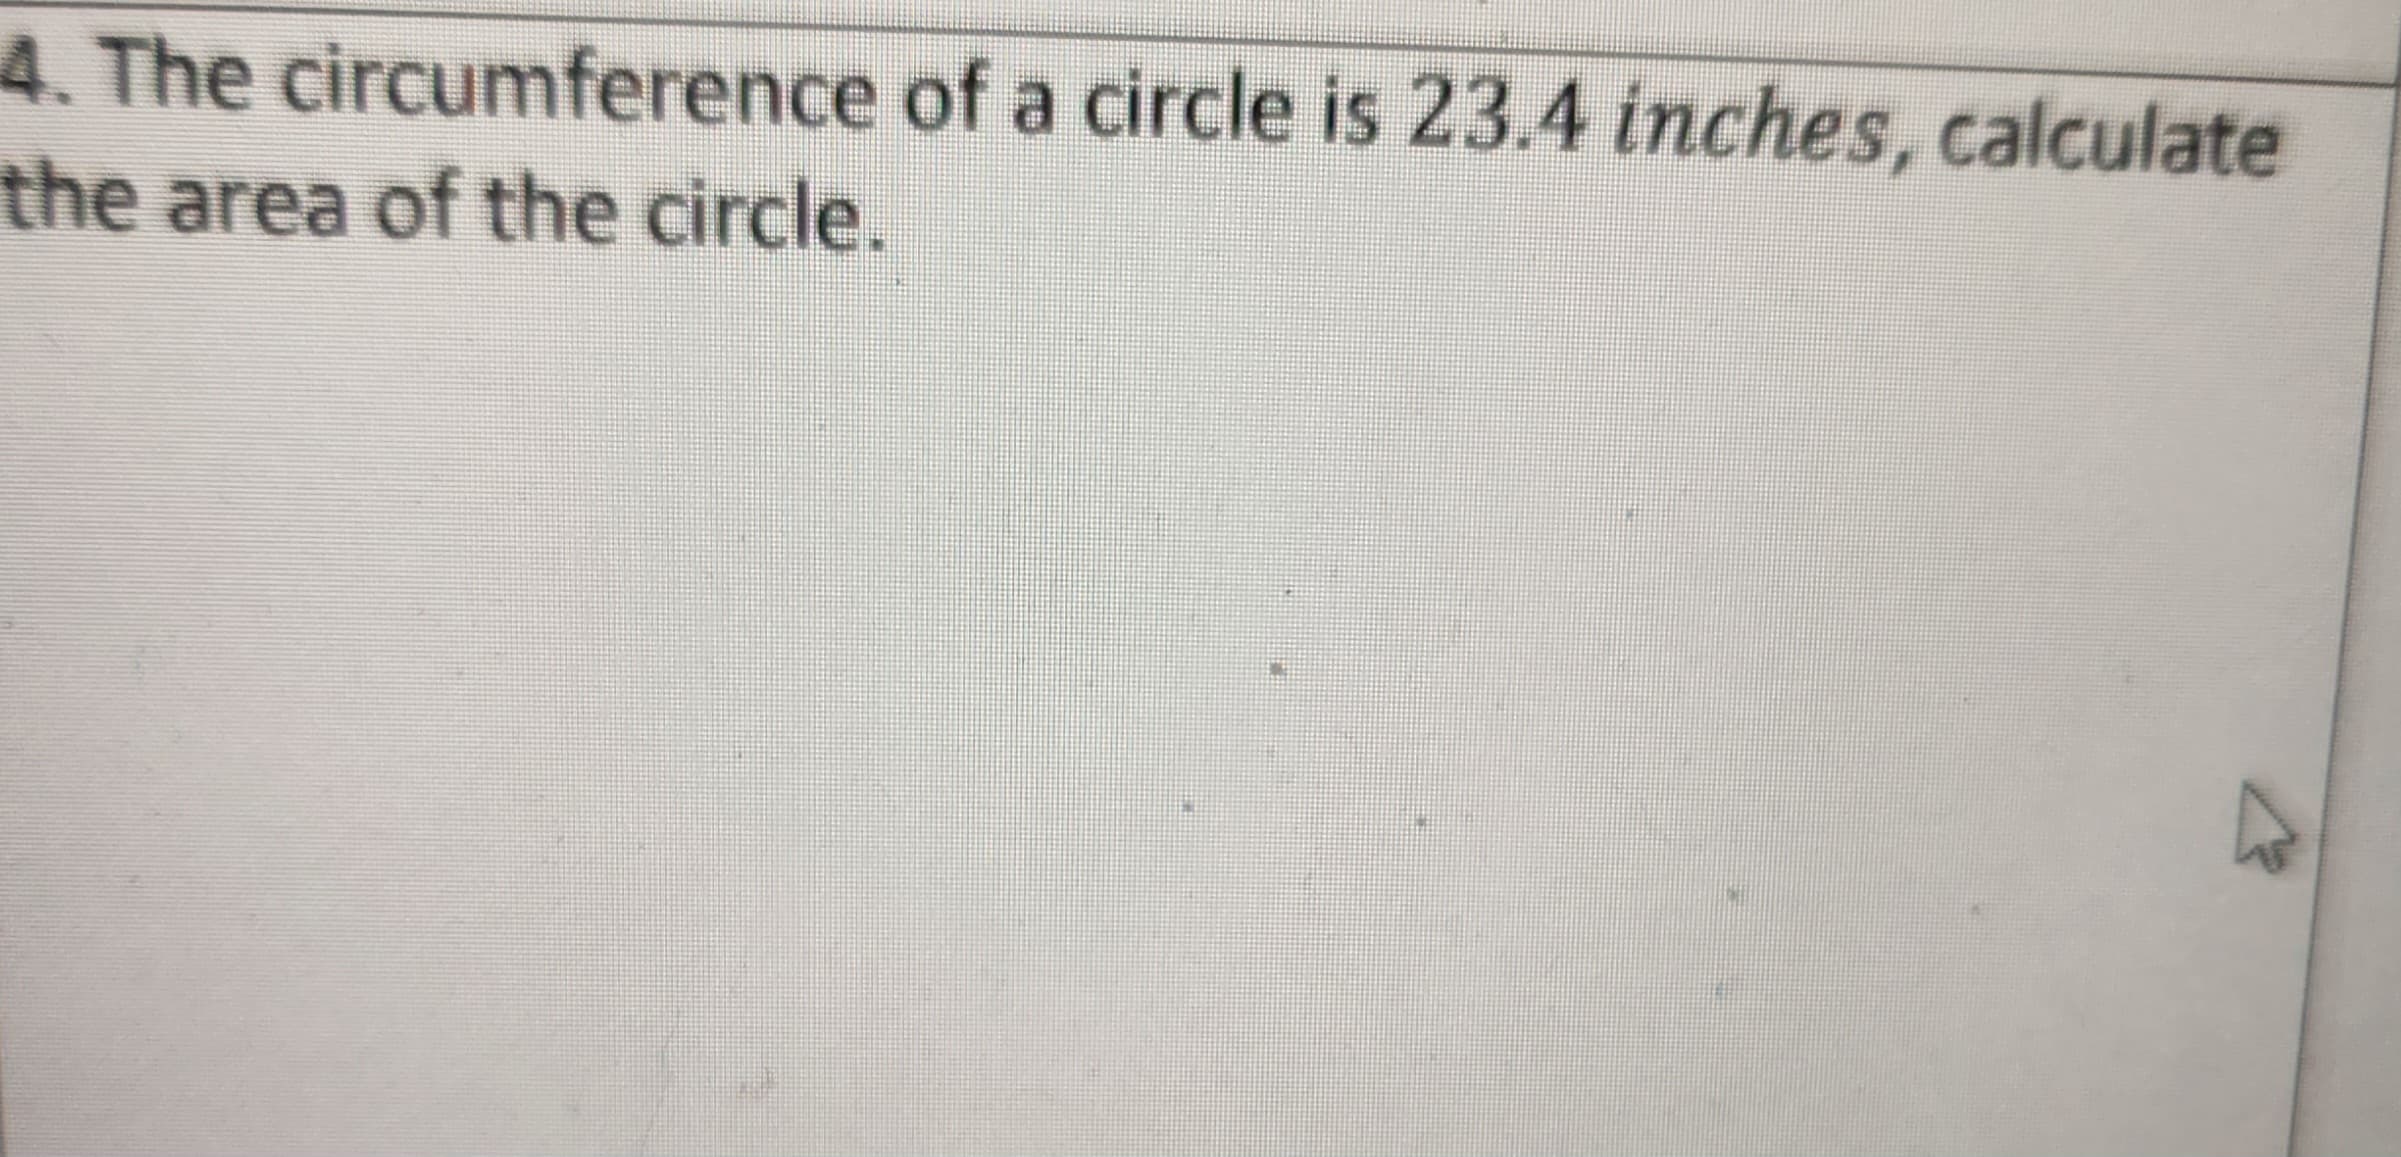 4. The circumference of a circle is 23.4 inches, calculate
the area of the circle.